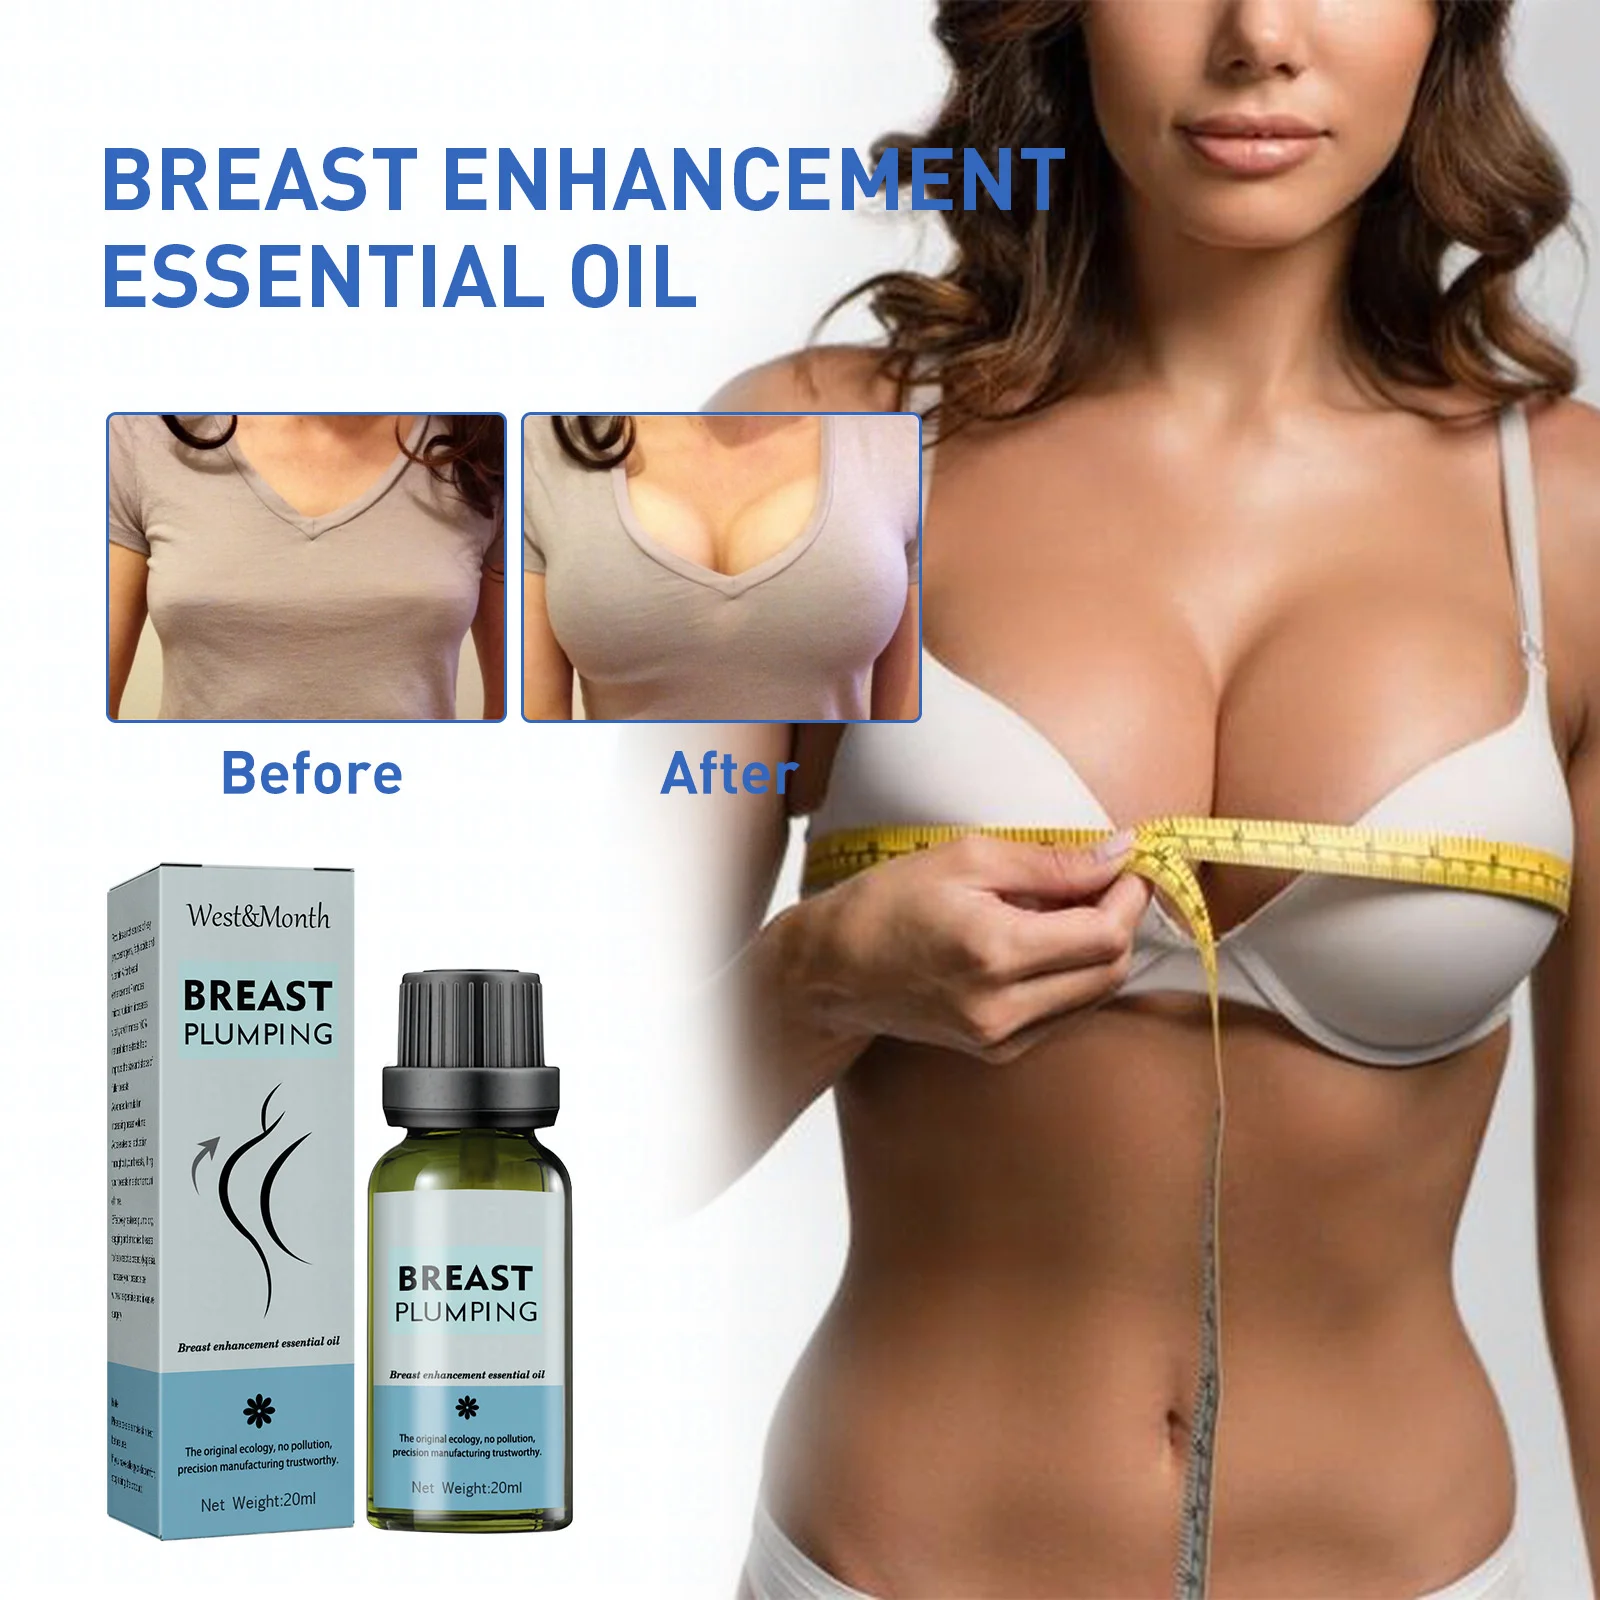 

Breast​ Enlargement Herbal After Give Birth Lifting Cream Firm And Tightness Excersize H Cup Quick Result Boobs growth